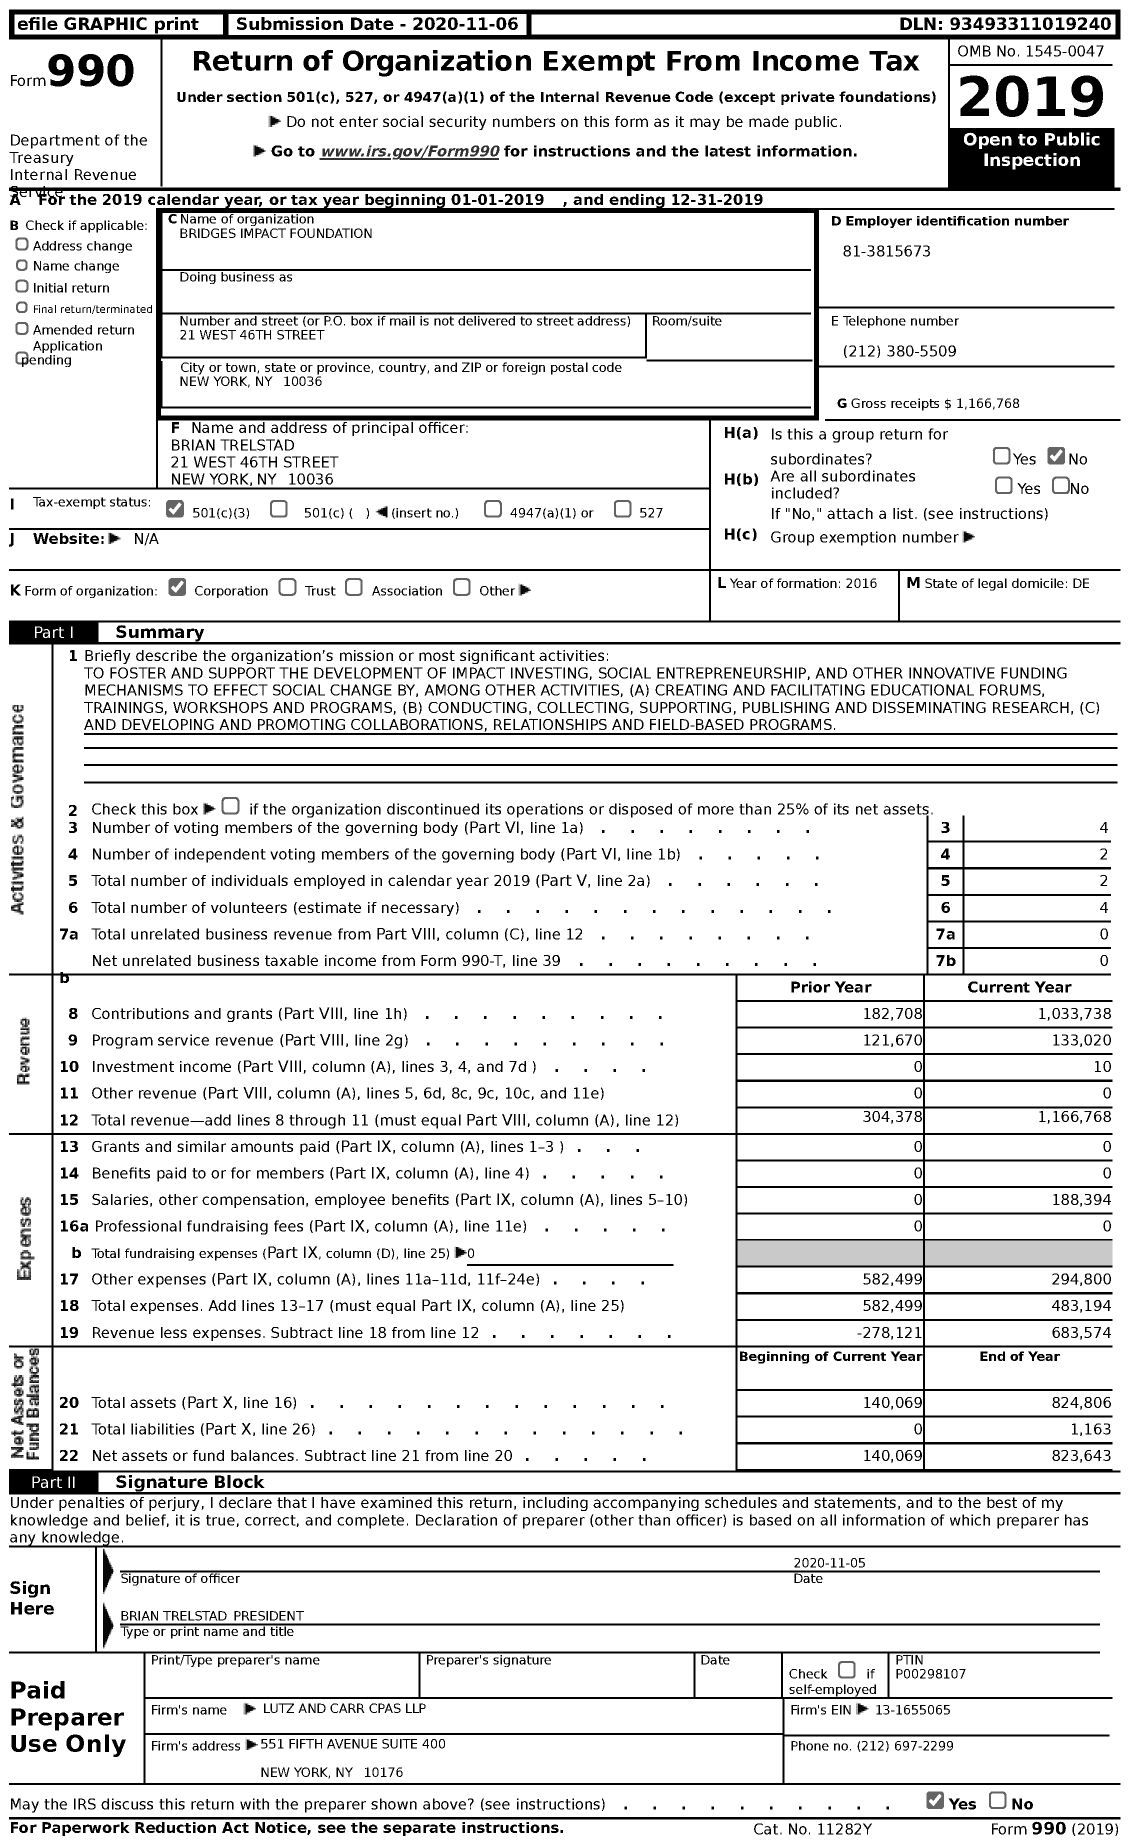 Image of first page of 2019 Form 990 for Bridges Impact Foundation